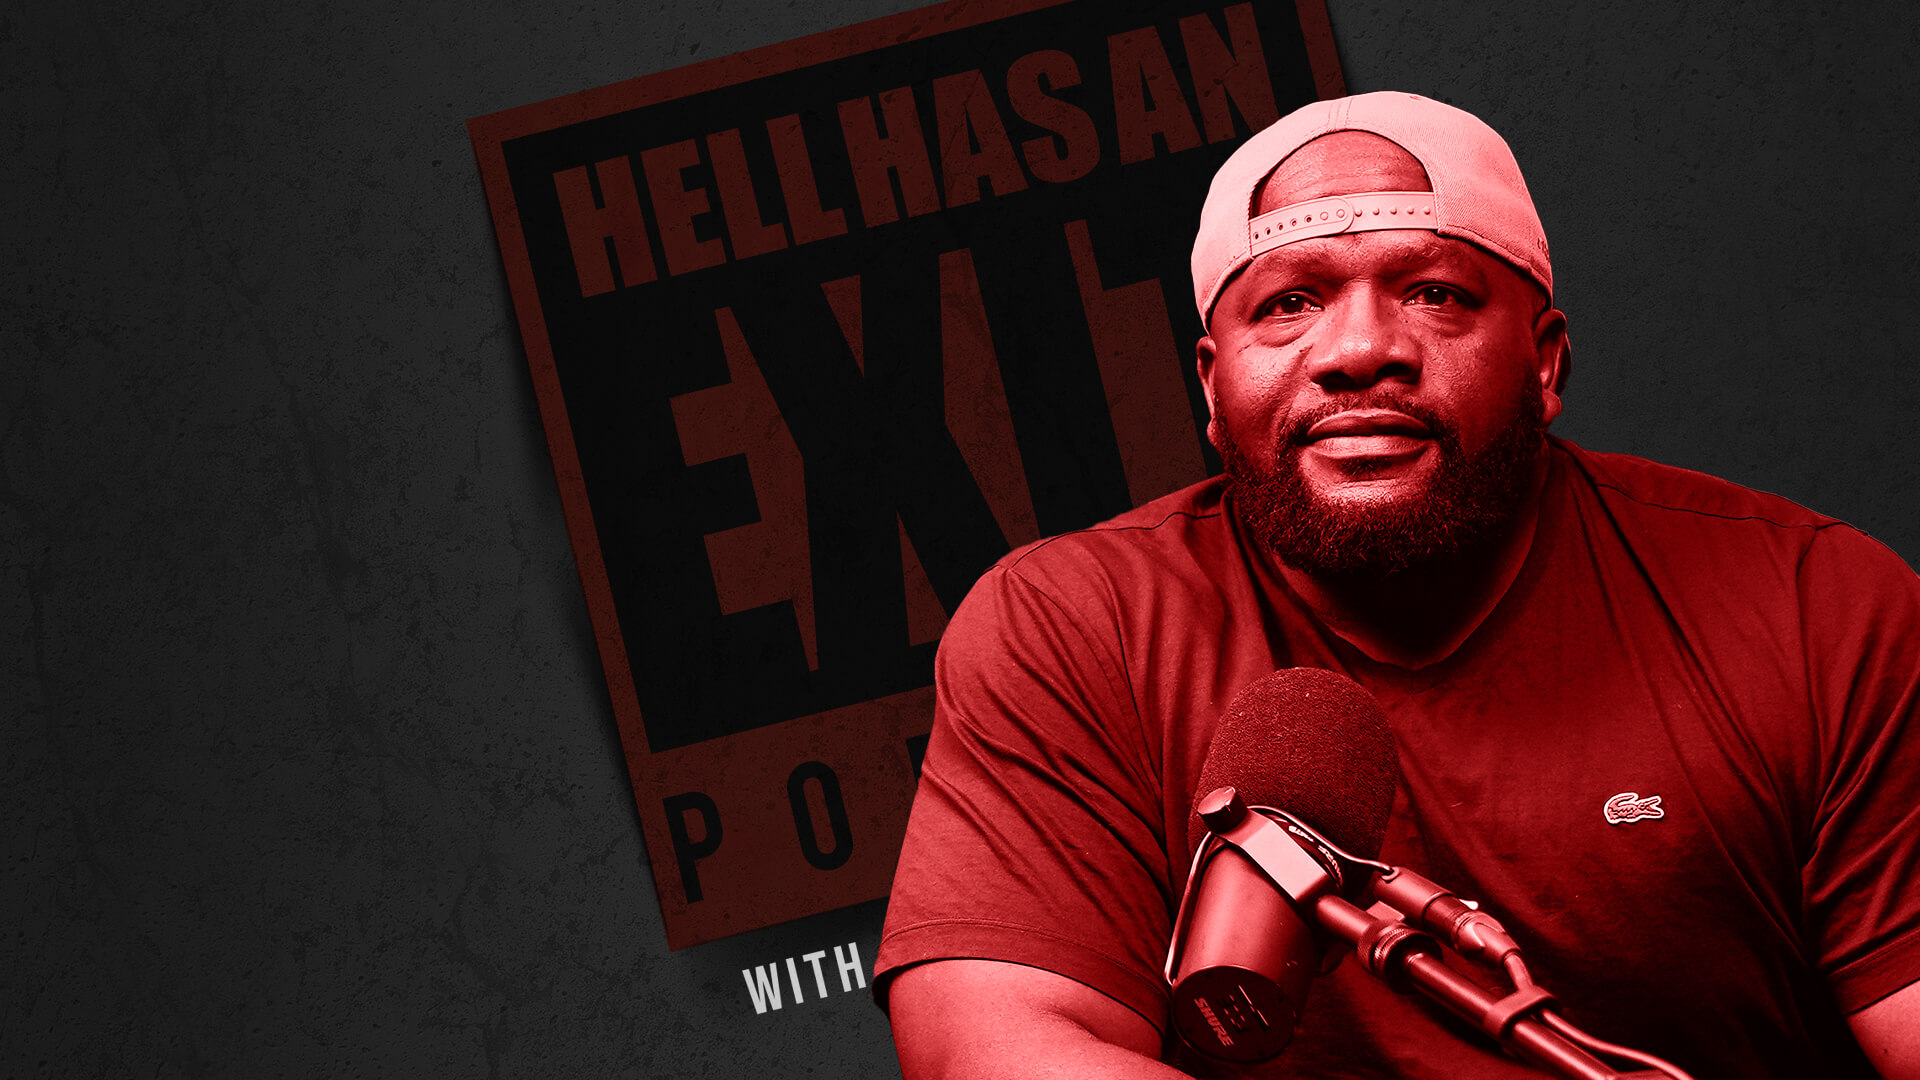 Episode #134: Big U's Journey from Gang Life to Mentorship in 'Hell Has An Exit' Podcast